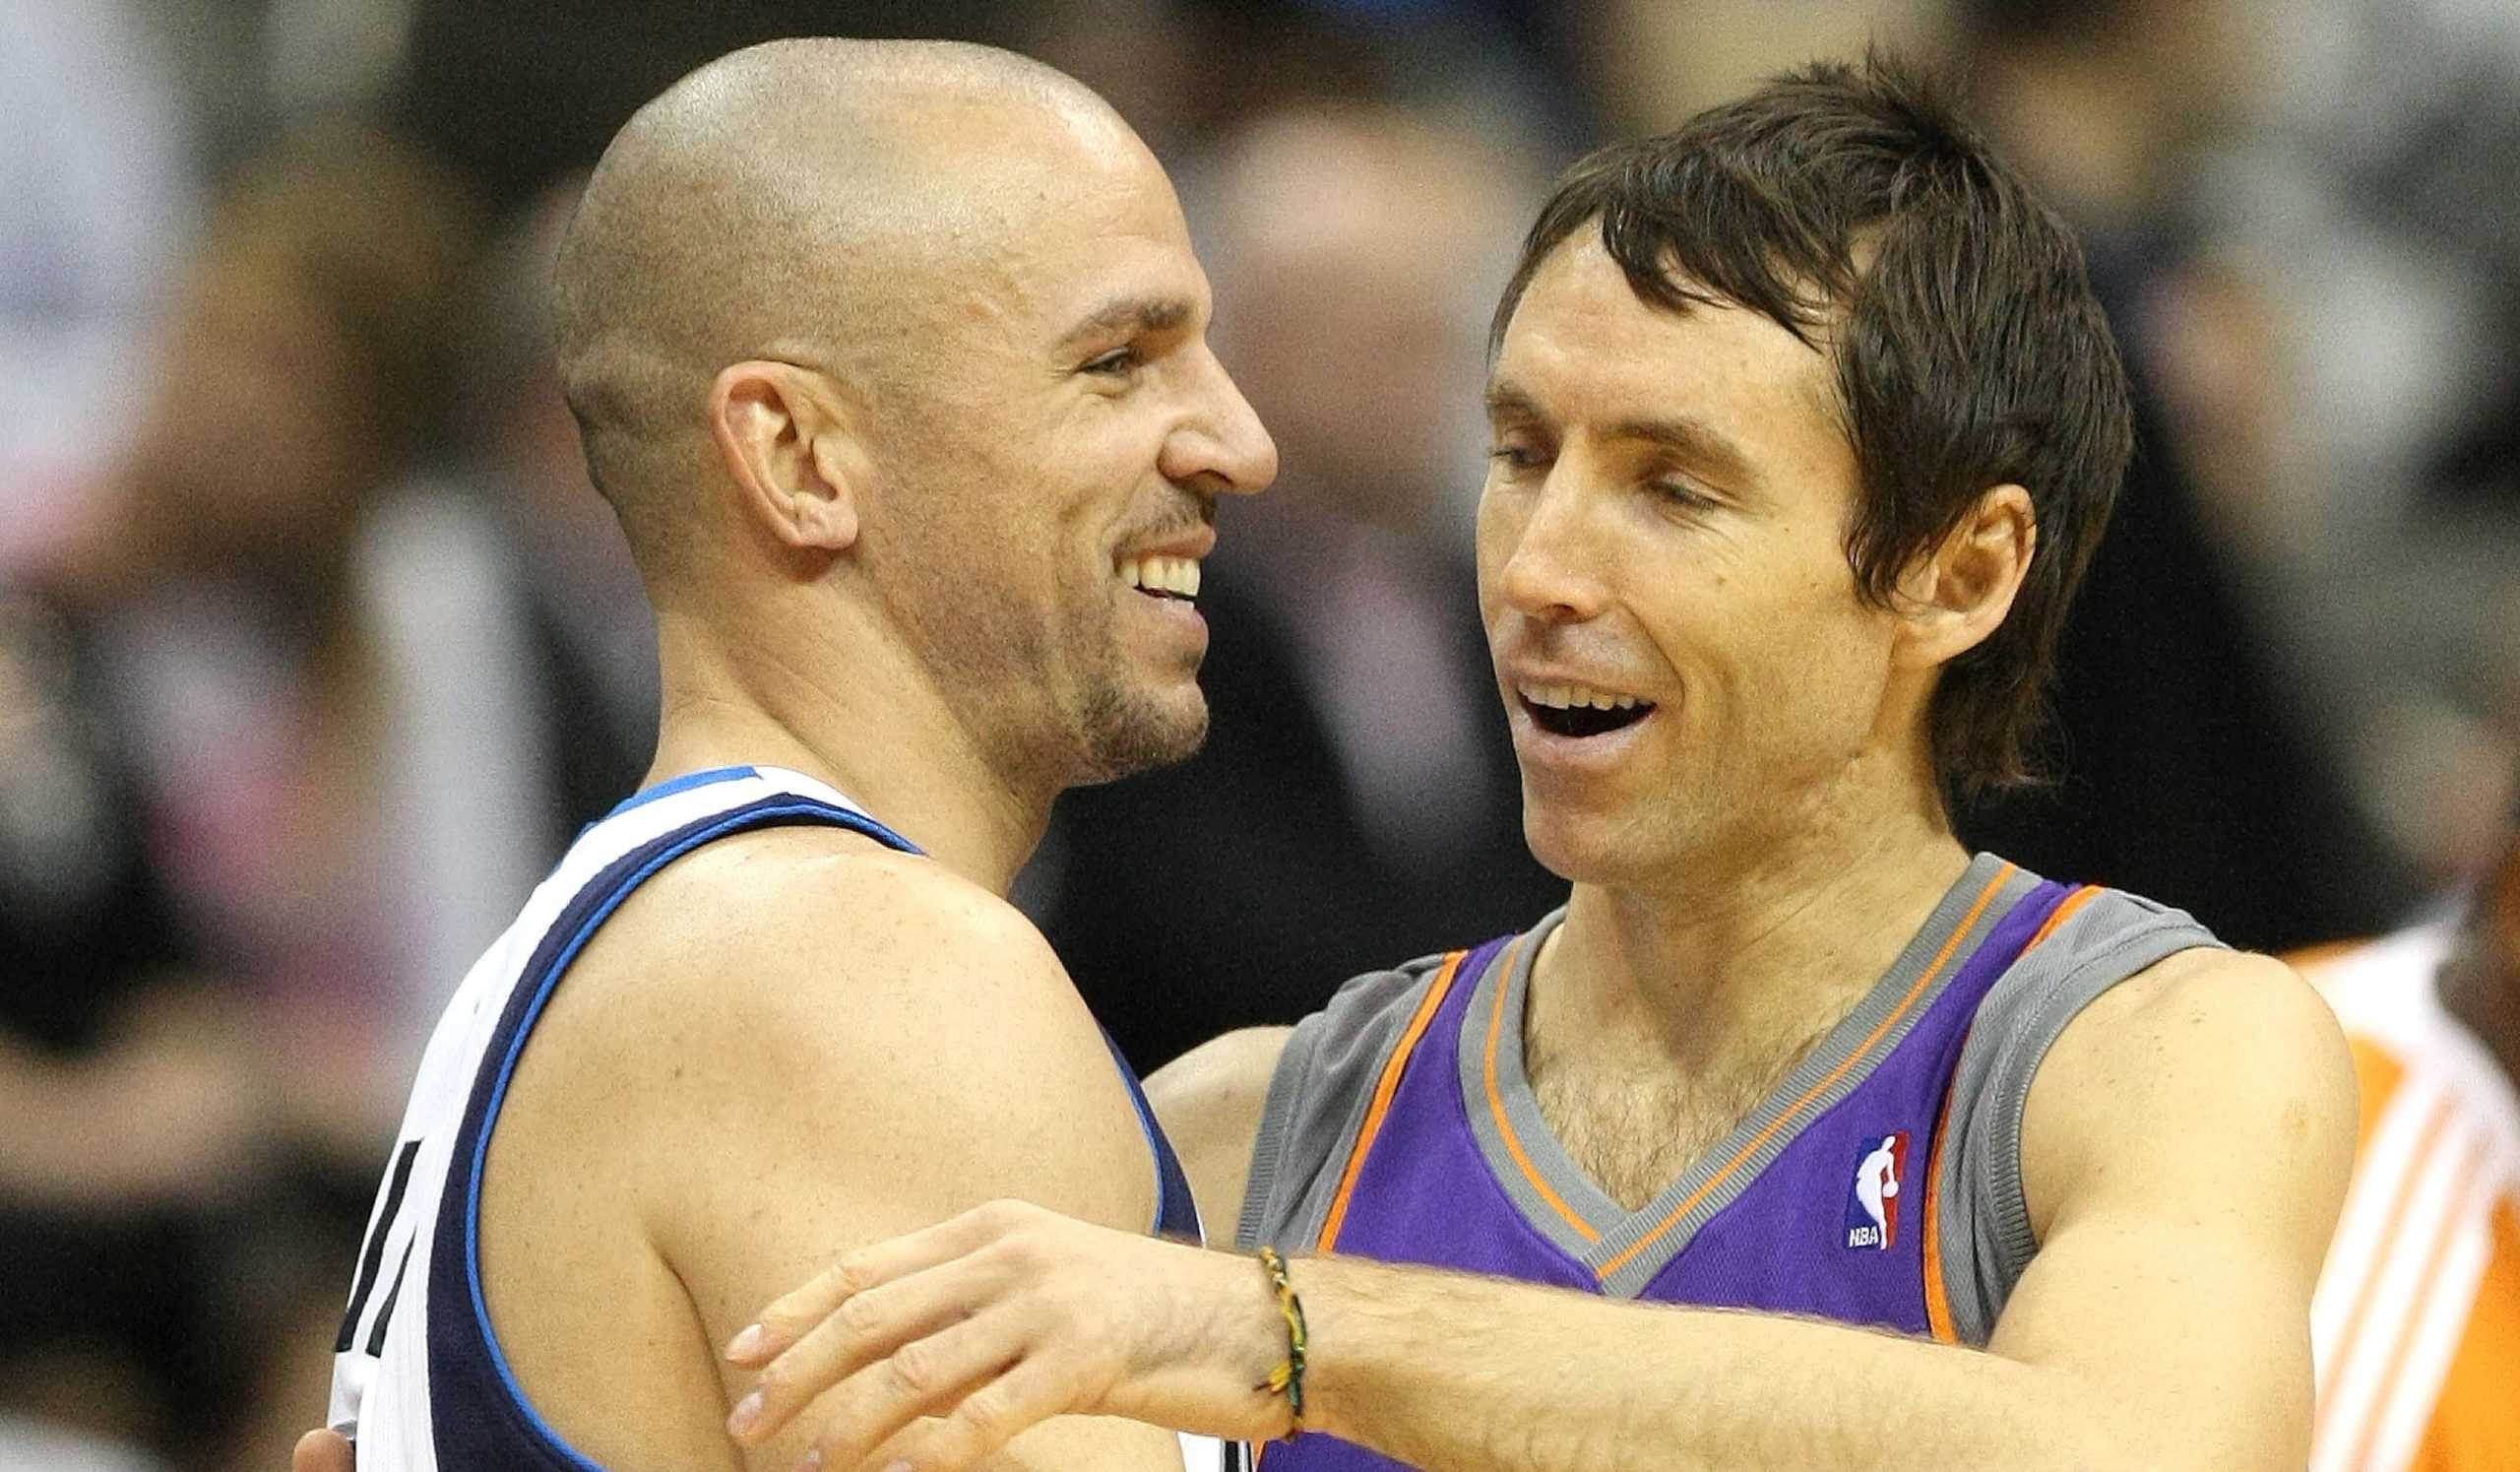 Dallas Mavericks' Jason Kidd (left) and Phoenix Suns' Steve Nash (right) greet each other before tip-off on Thursday, Dec. 4, 2008 at the American Airlines Center in Dallas, Texas. (Ron Jenkins/Fort Worth Star-Telegram/TNS)